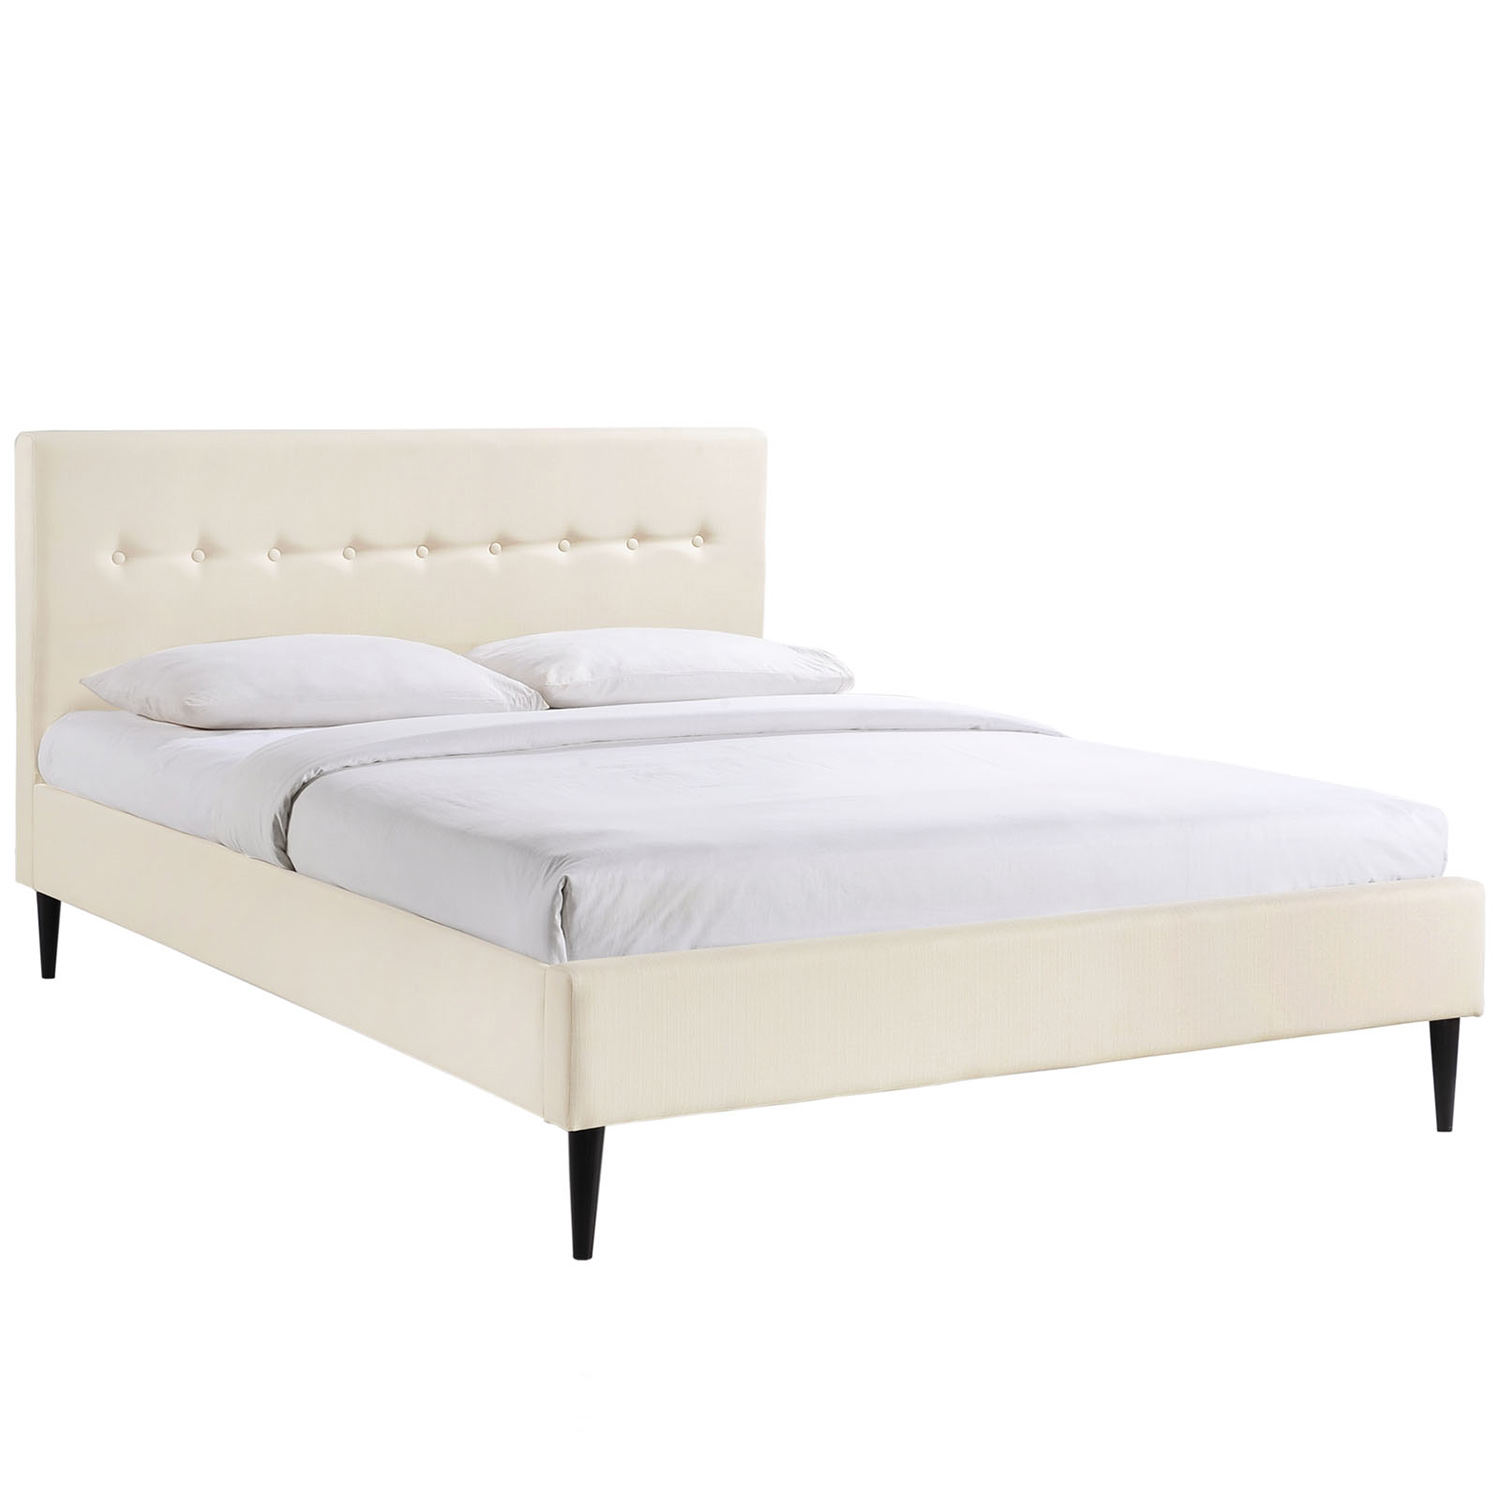 Modway Stacy Queen Bed - Ivory